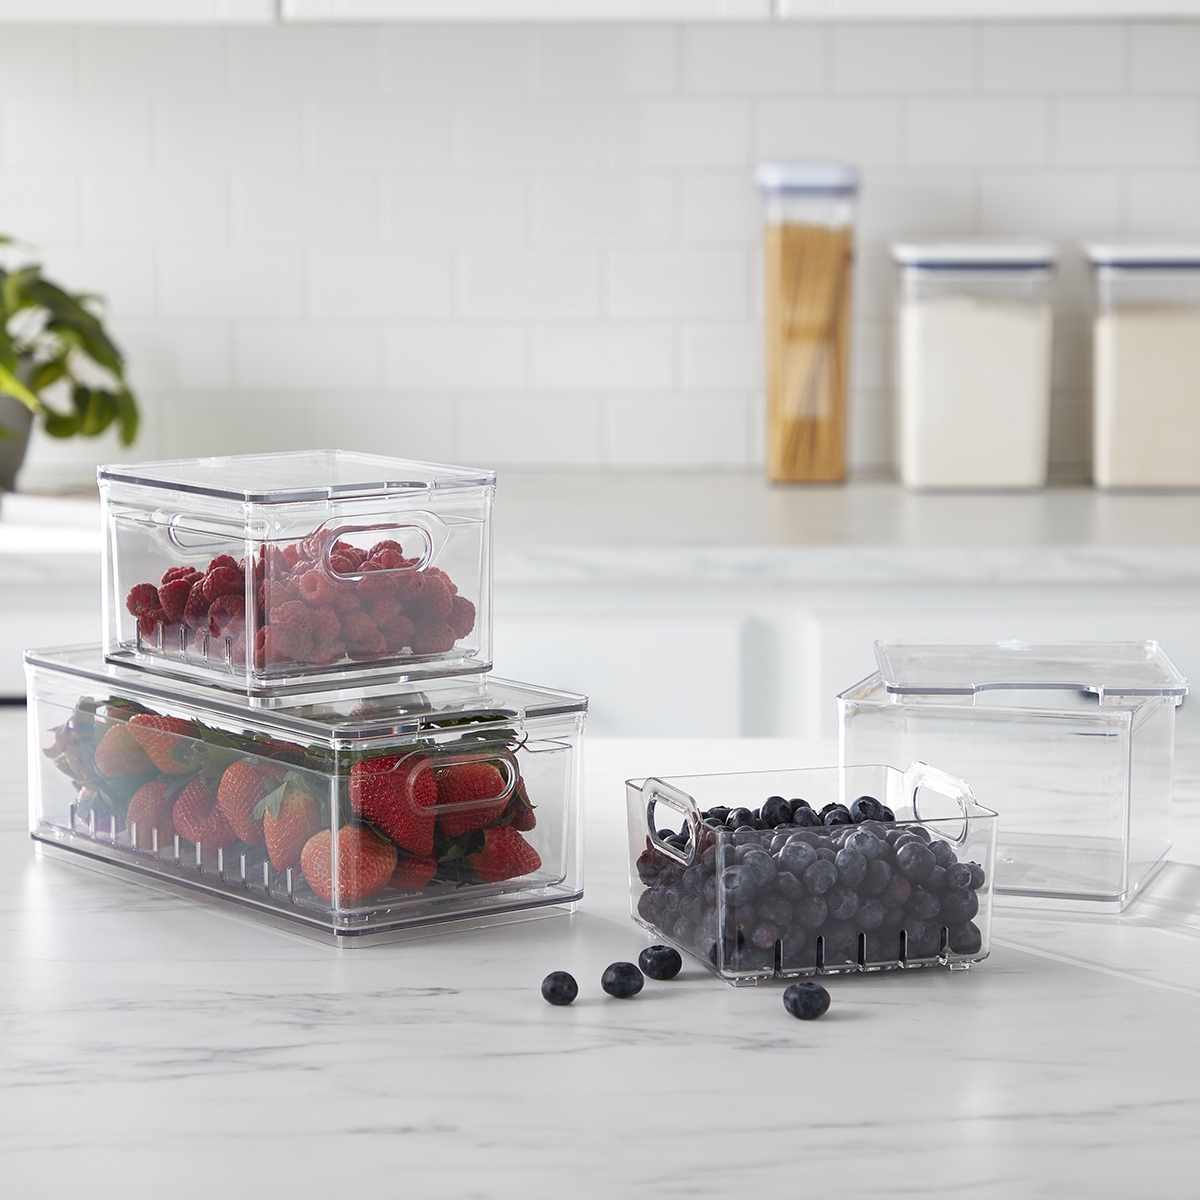 https://www.containerstore.com/catalogimages/389039/SU_20_THE-Kitchen-Island_Berries_RGB.jpg